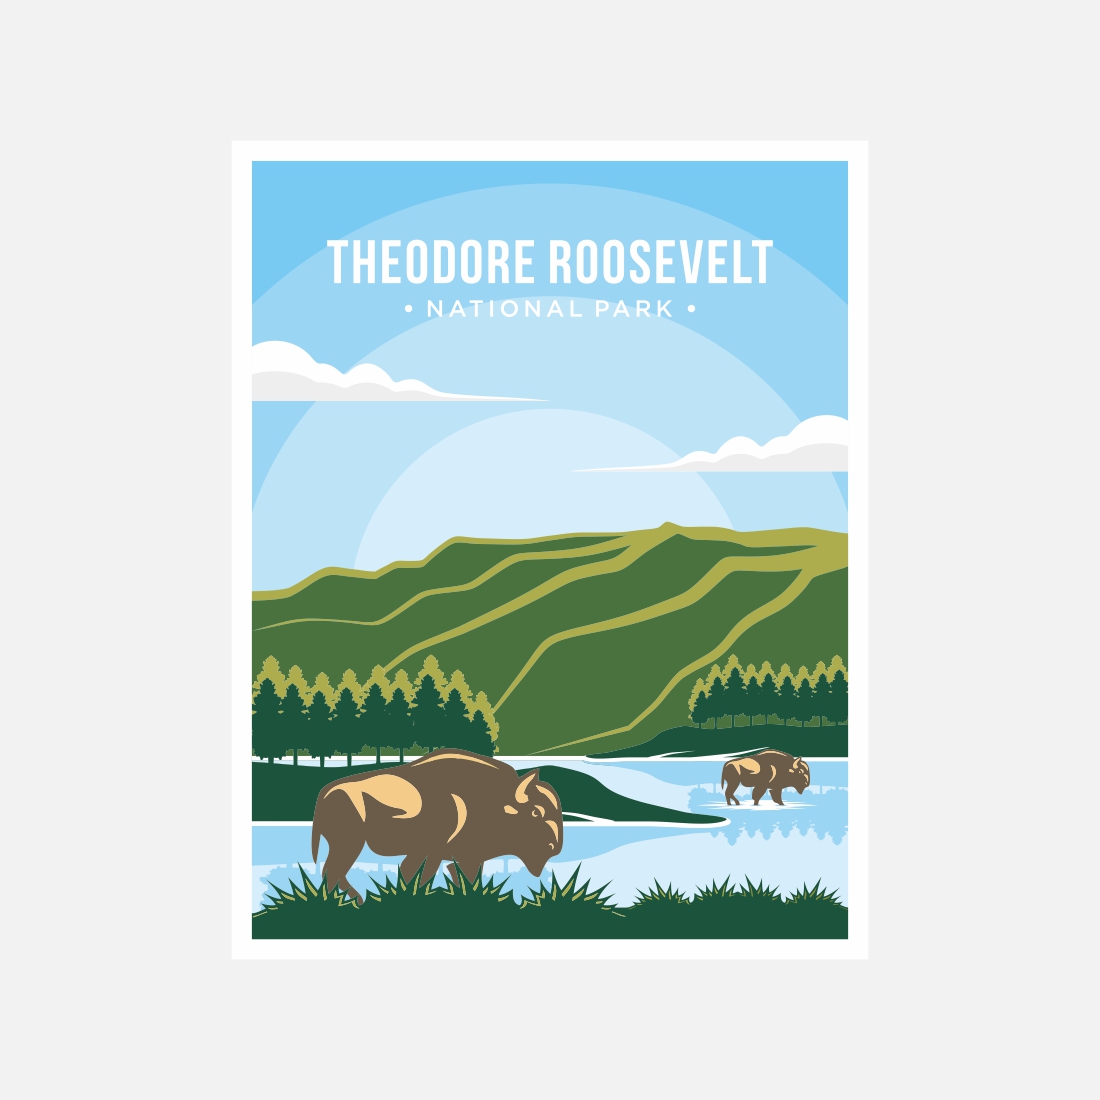 Theodore Roosevelt National Park poster vector illustration design – Only $8 preview image.